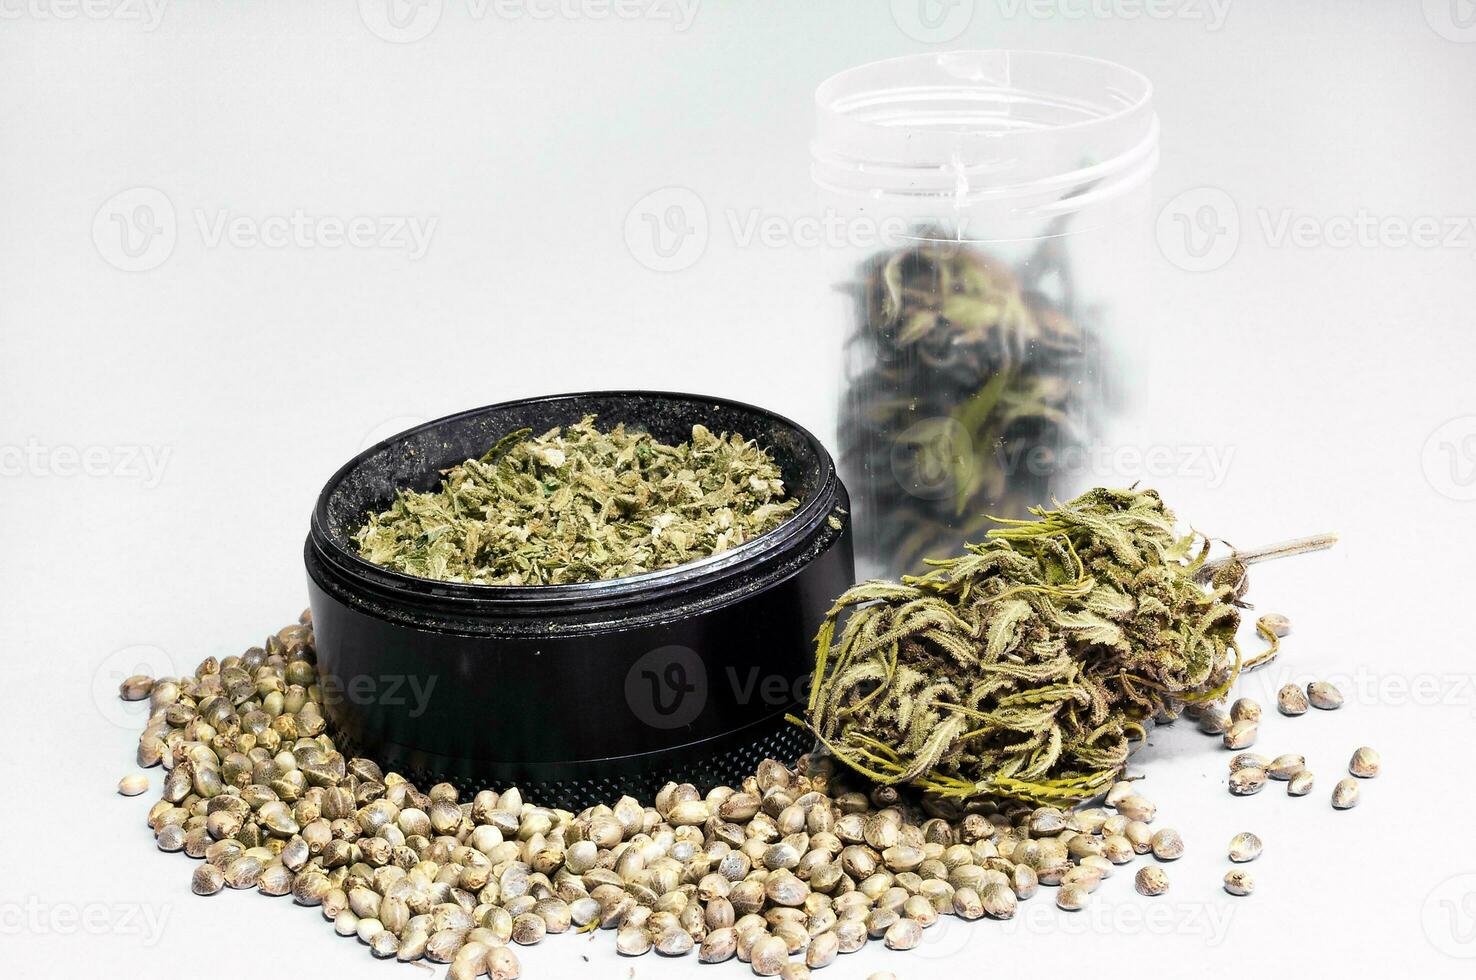 herb grinder full of crushed buds and dry flowers of medical marijuana surrounded by seeds close up on white background photo